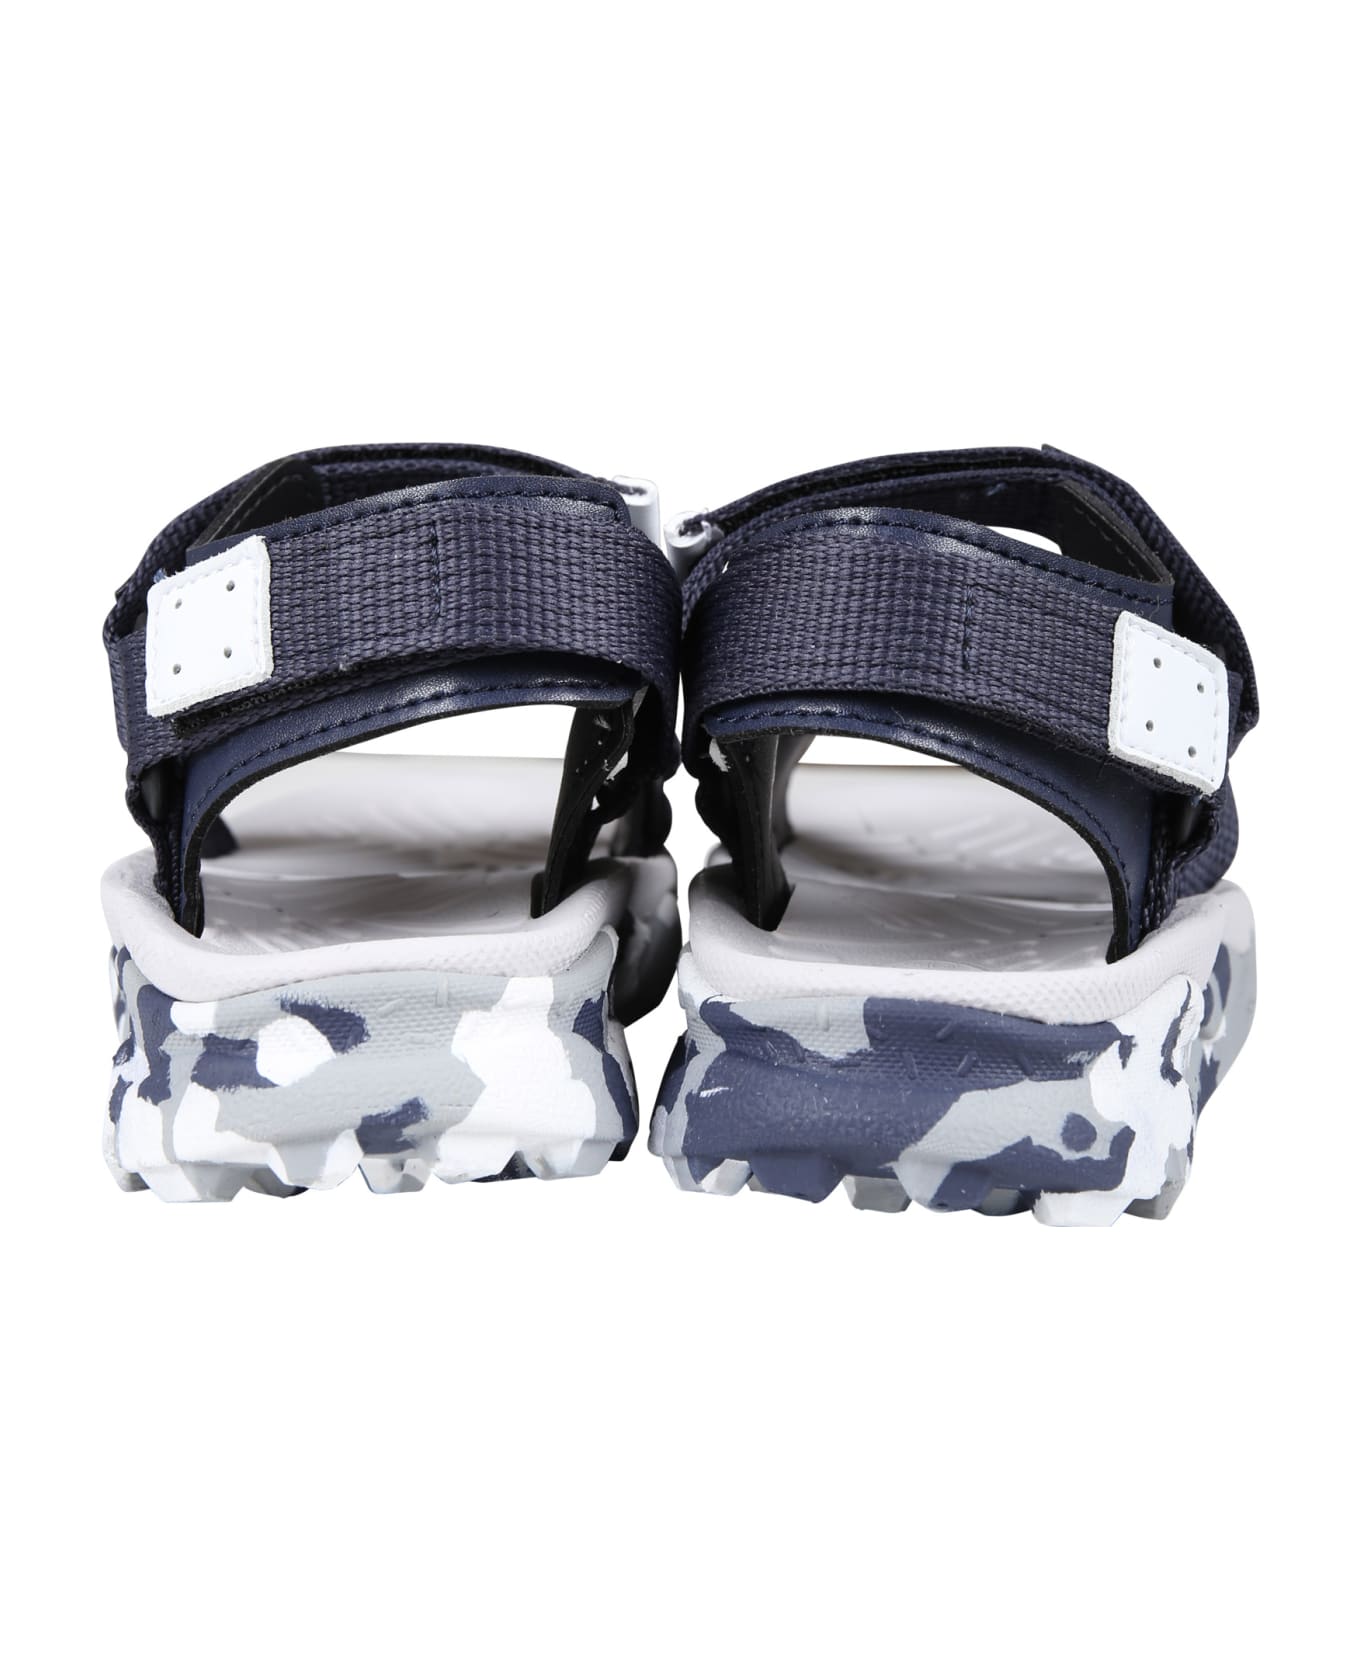 Flower Mountain Black Nazca Sandals For Baby Boy With - Blue